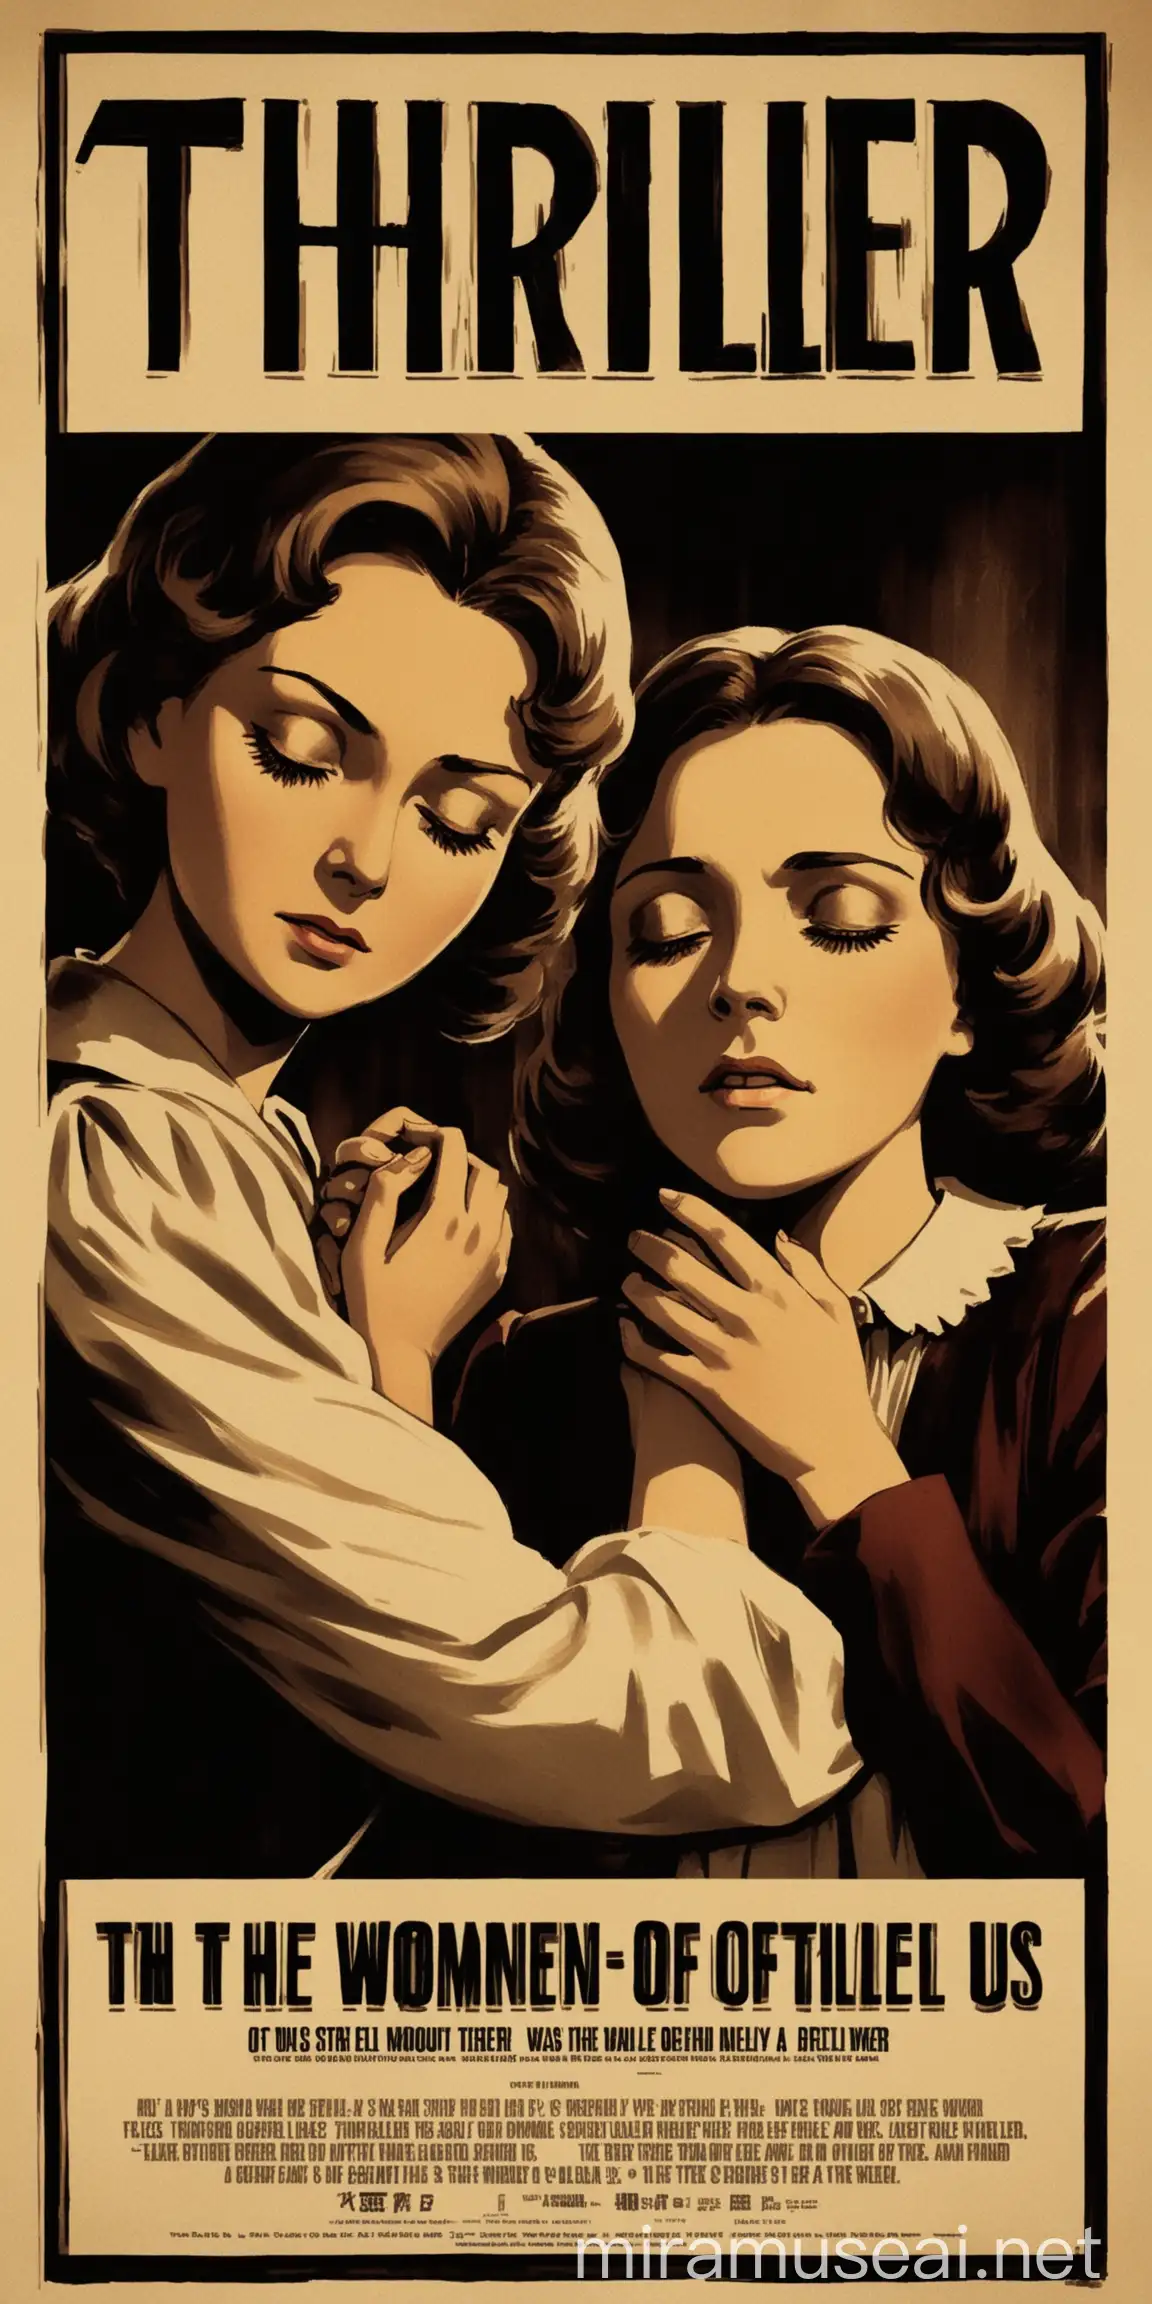 an old fashioned thriller poster about the story of two women. Focus on their faces. One of them has closed eyes. The other one is looking directly at us